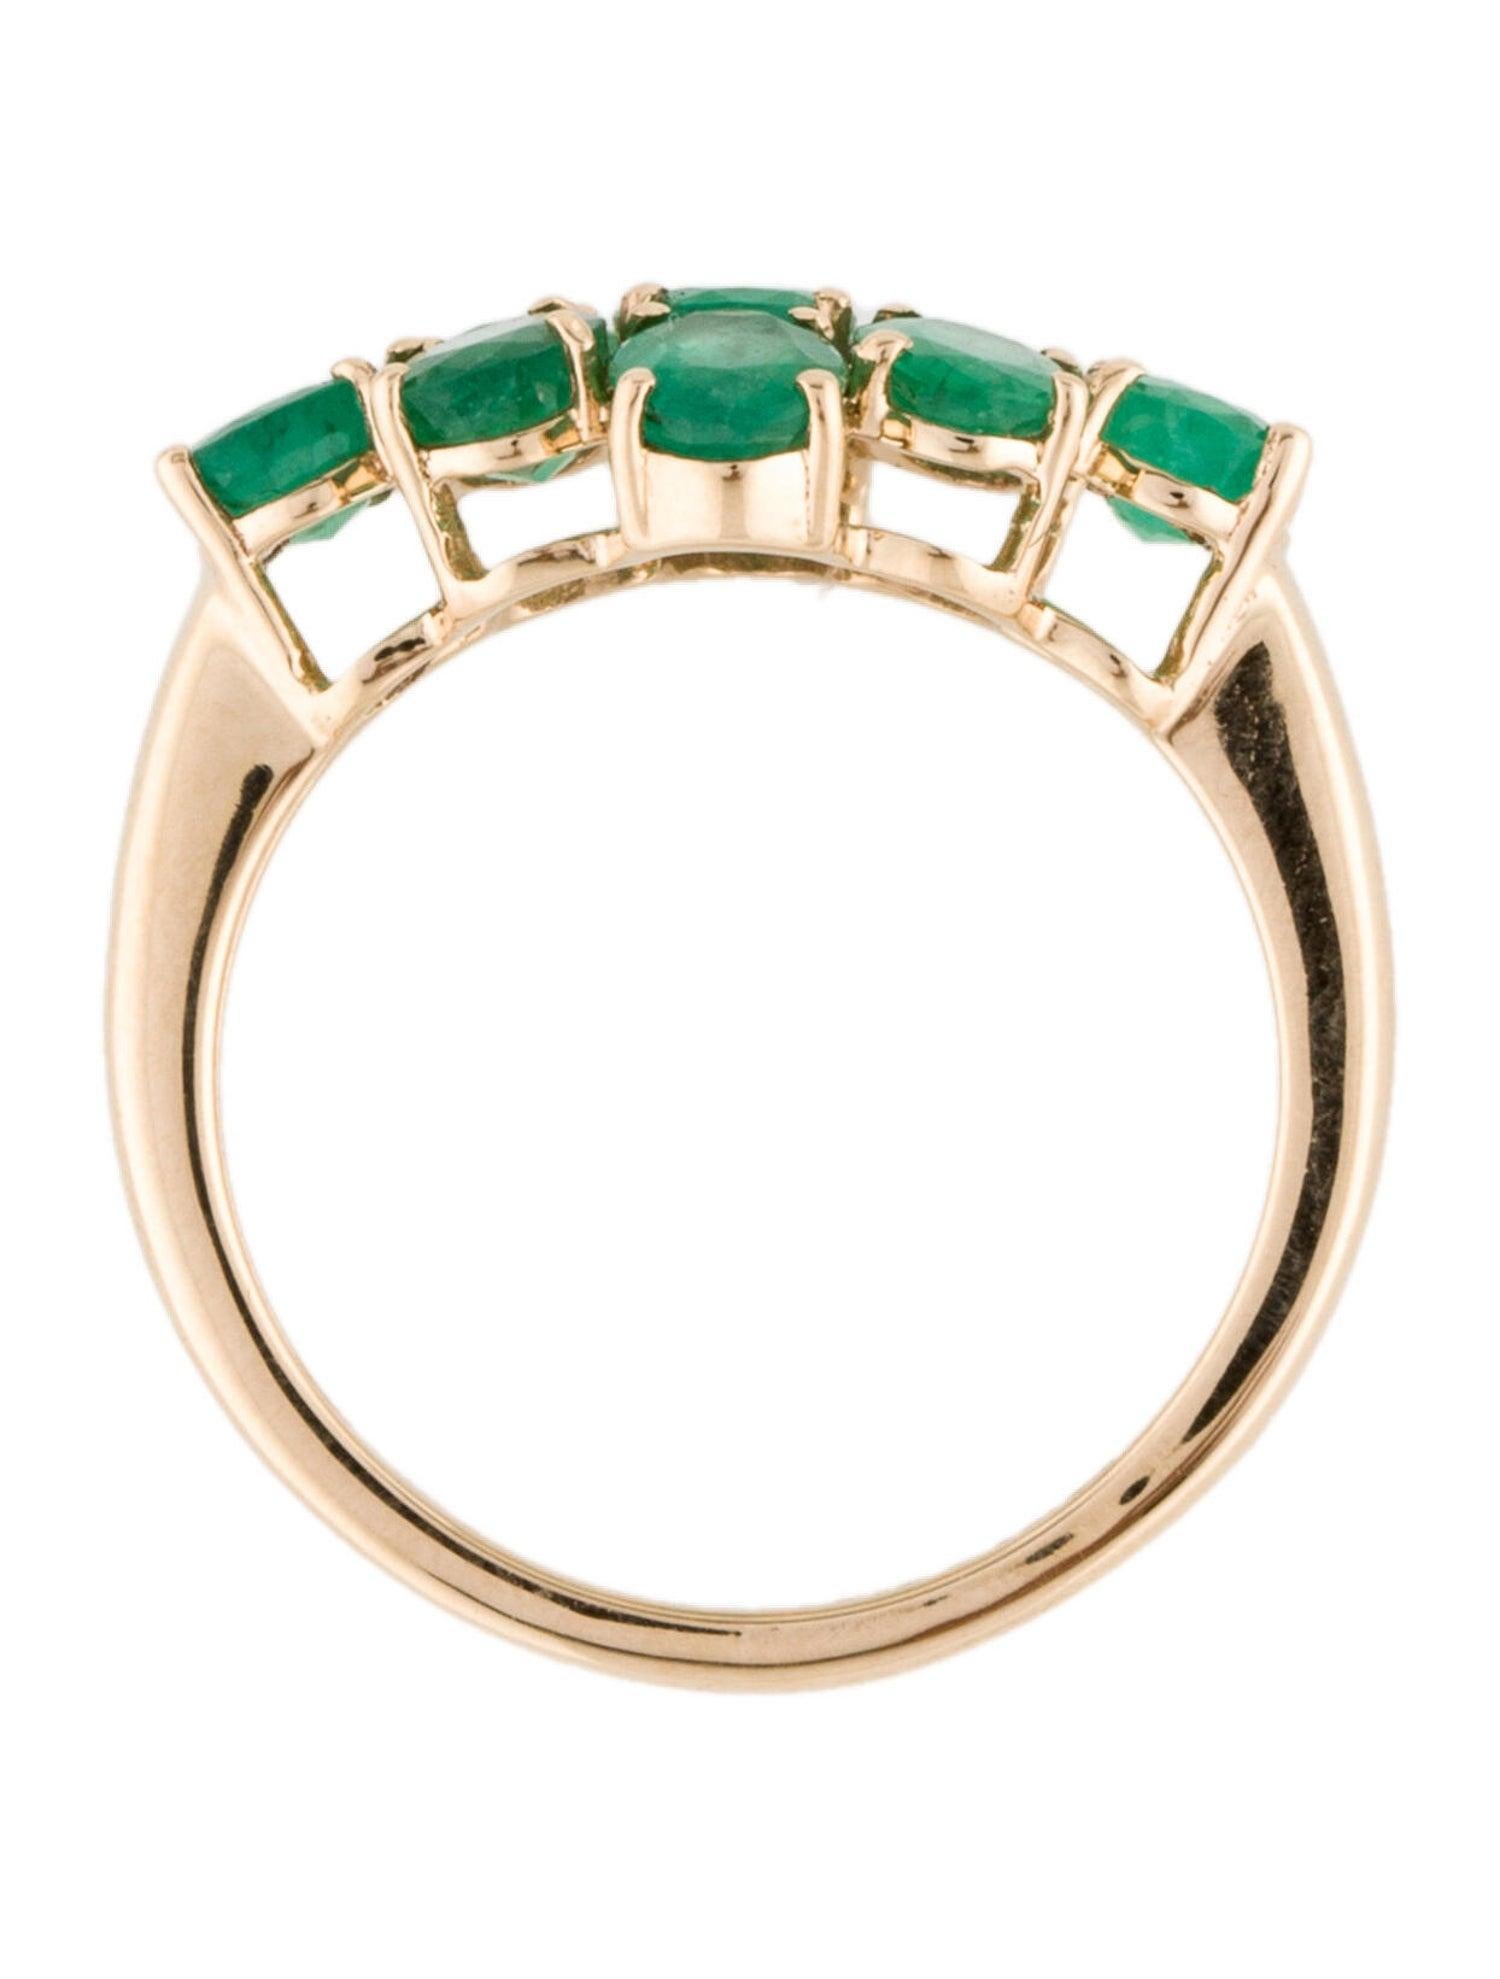 14K Emerald Cocktail Ring Size 6.75 - Elegant Statement Jewelry, Luxury Design In New Condition For Sale In Holtsville, NY